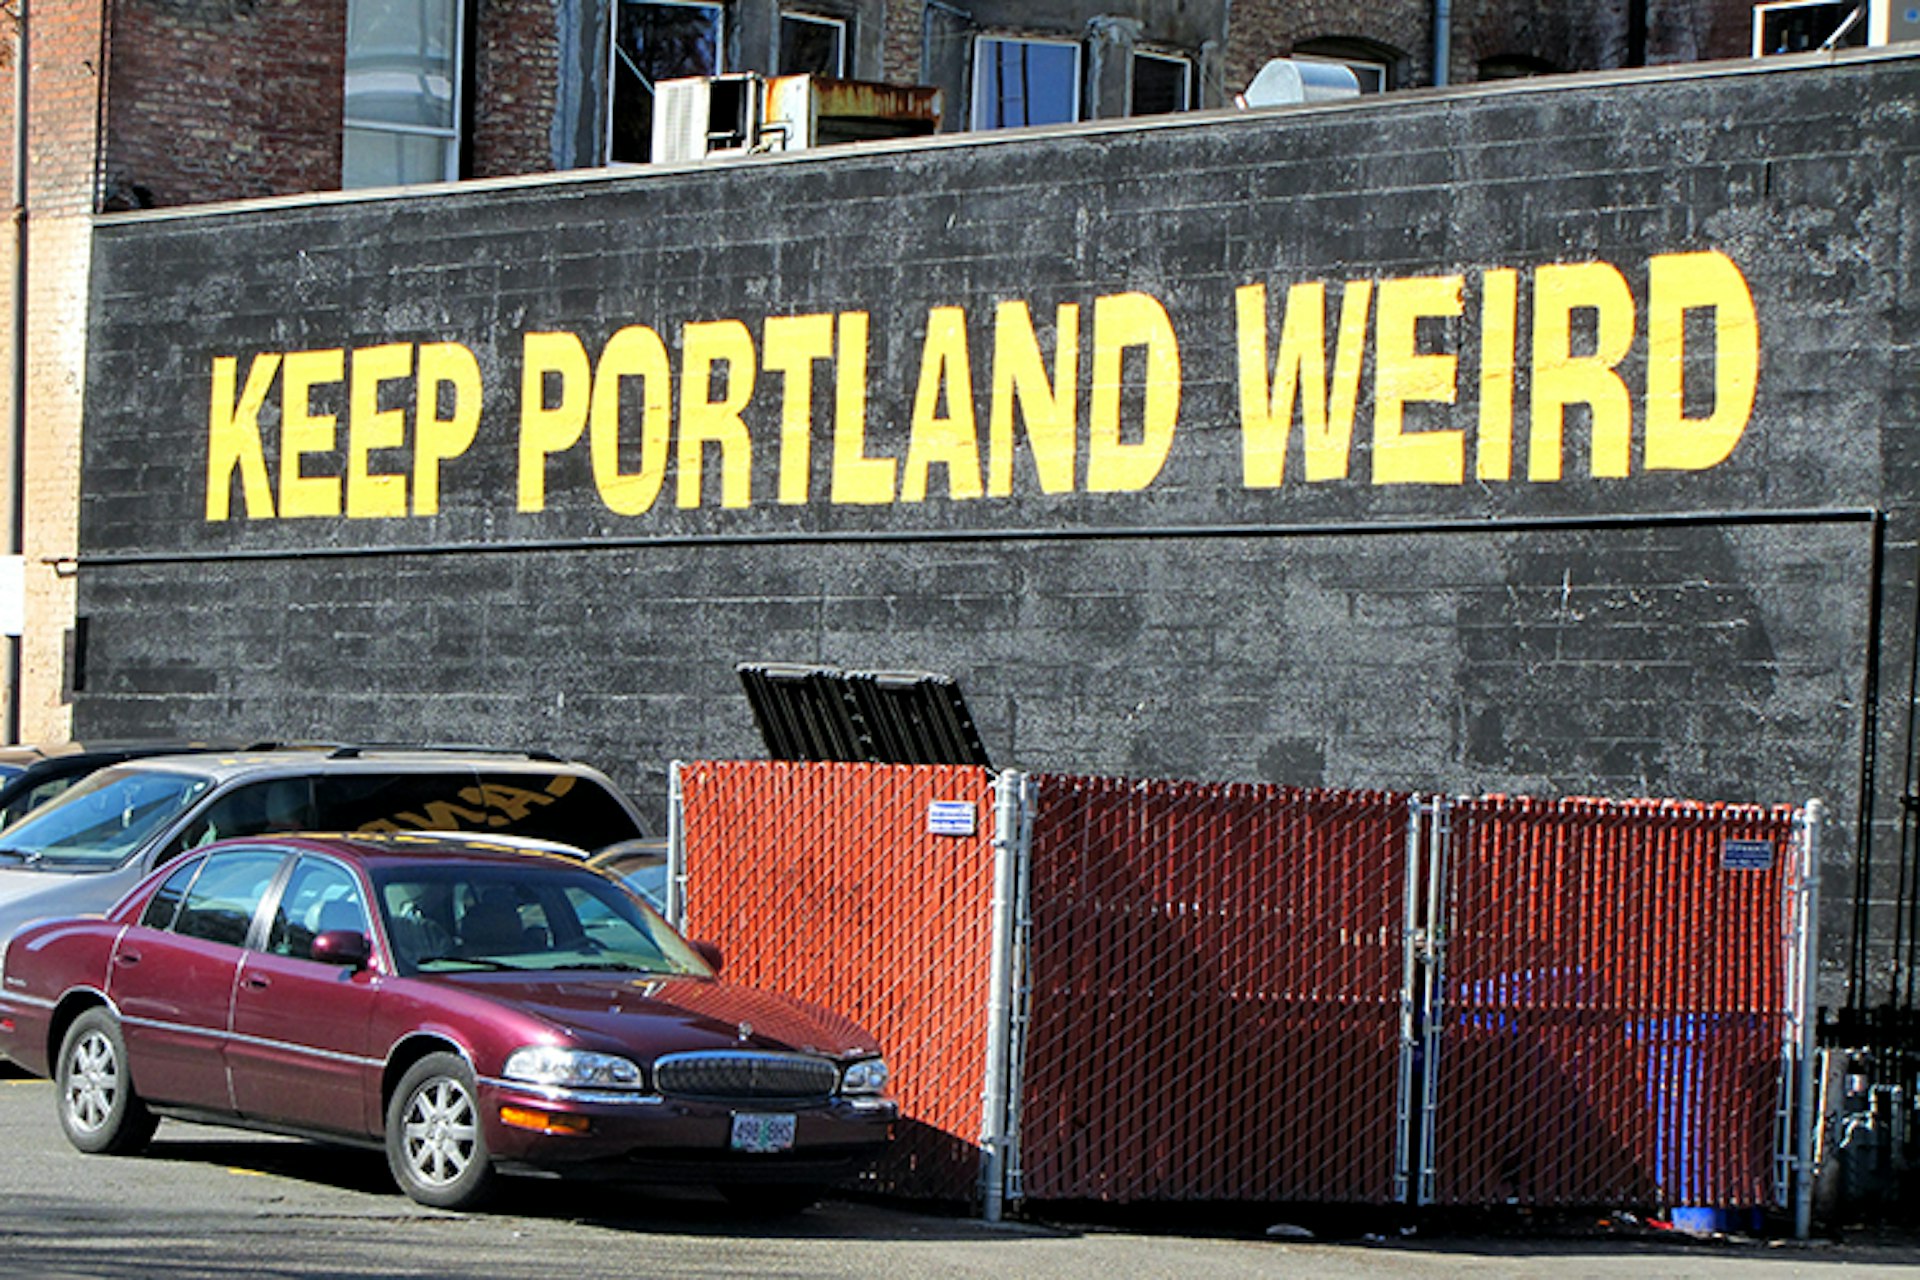 The 'Keep Portland Weird' slogan is based on a similar Austin, TX, effort to support independent businesses. Image by David Berkowitz / CC BY 2.0